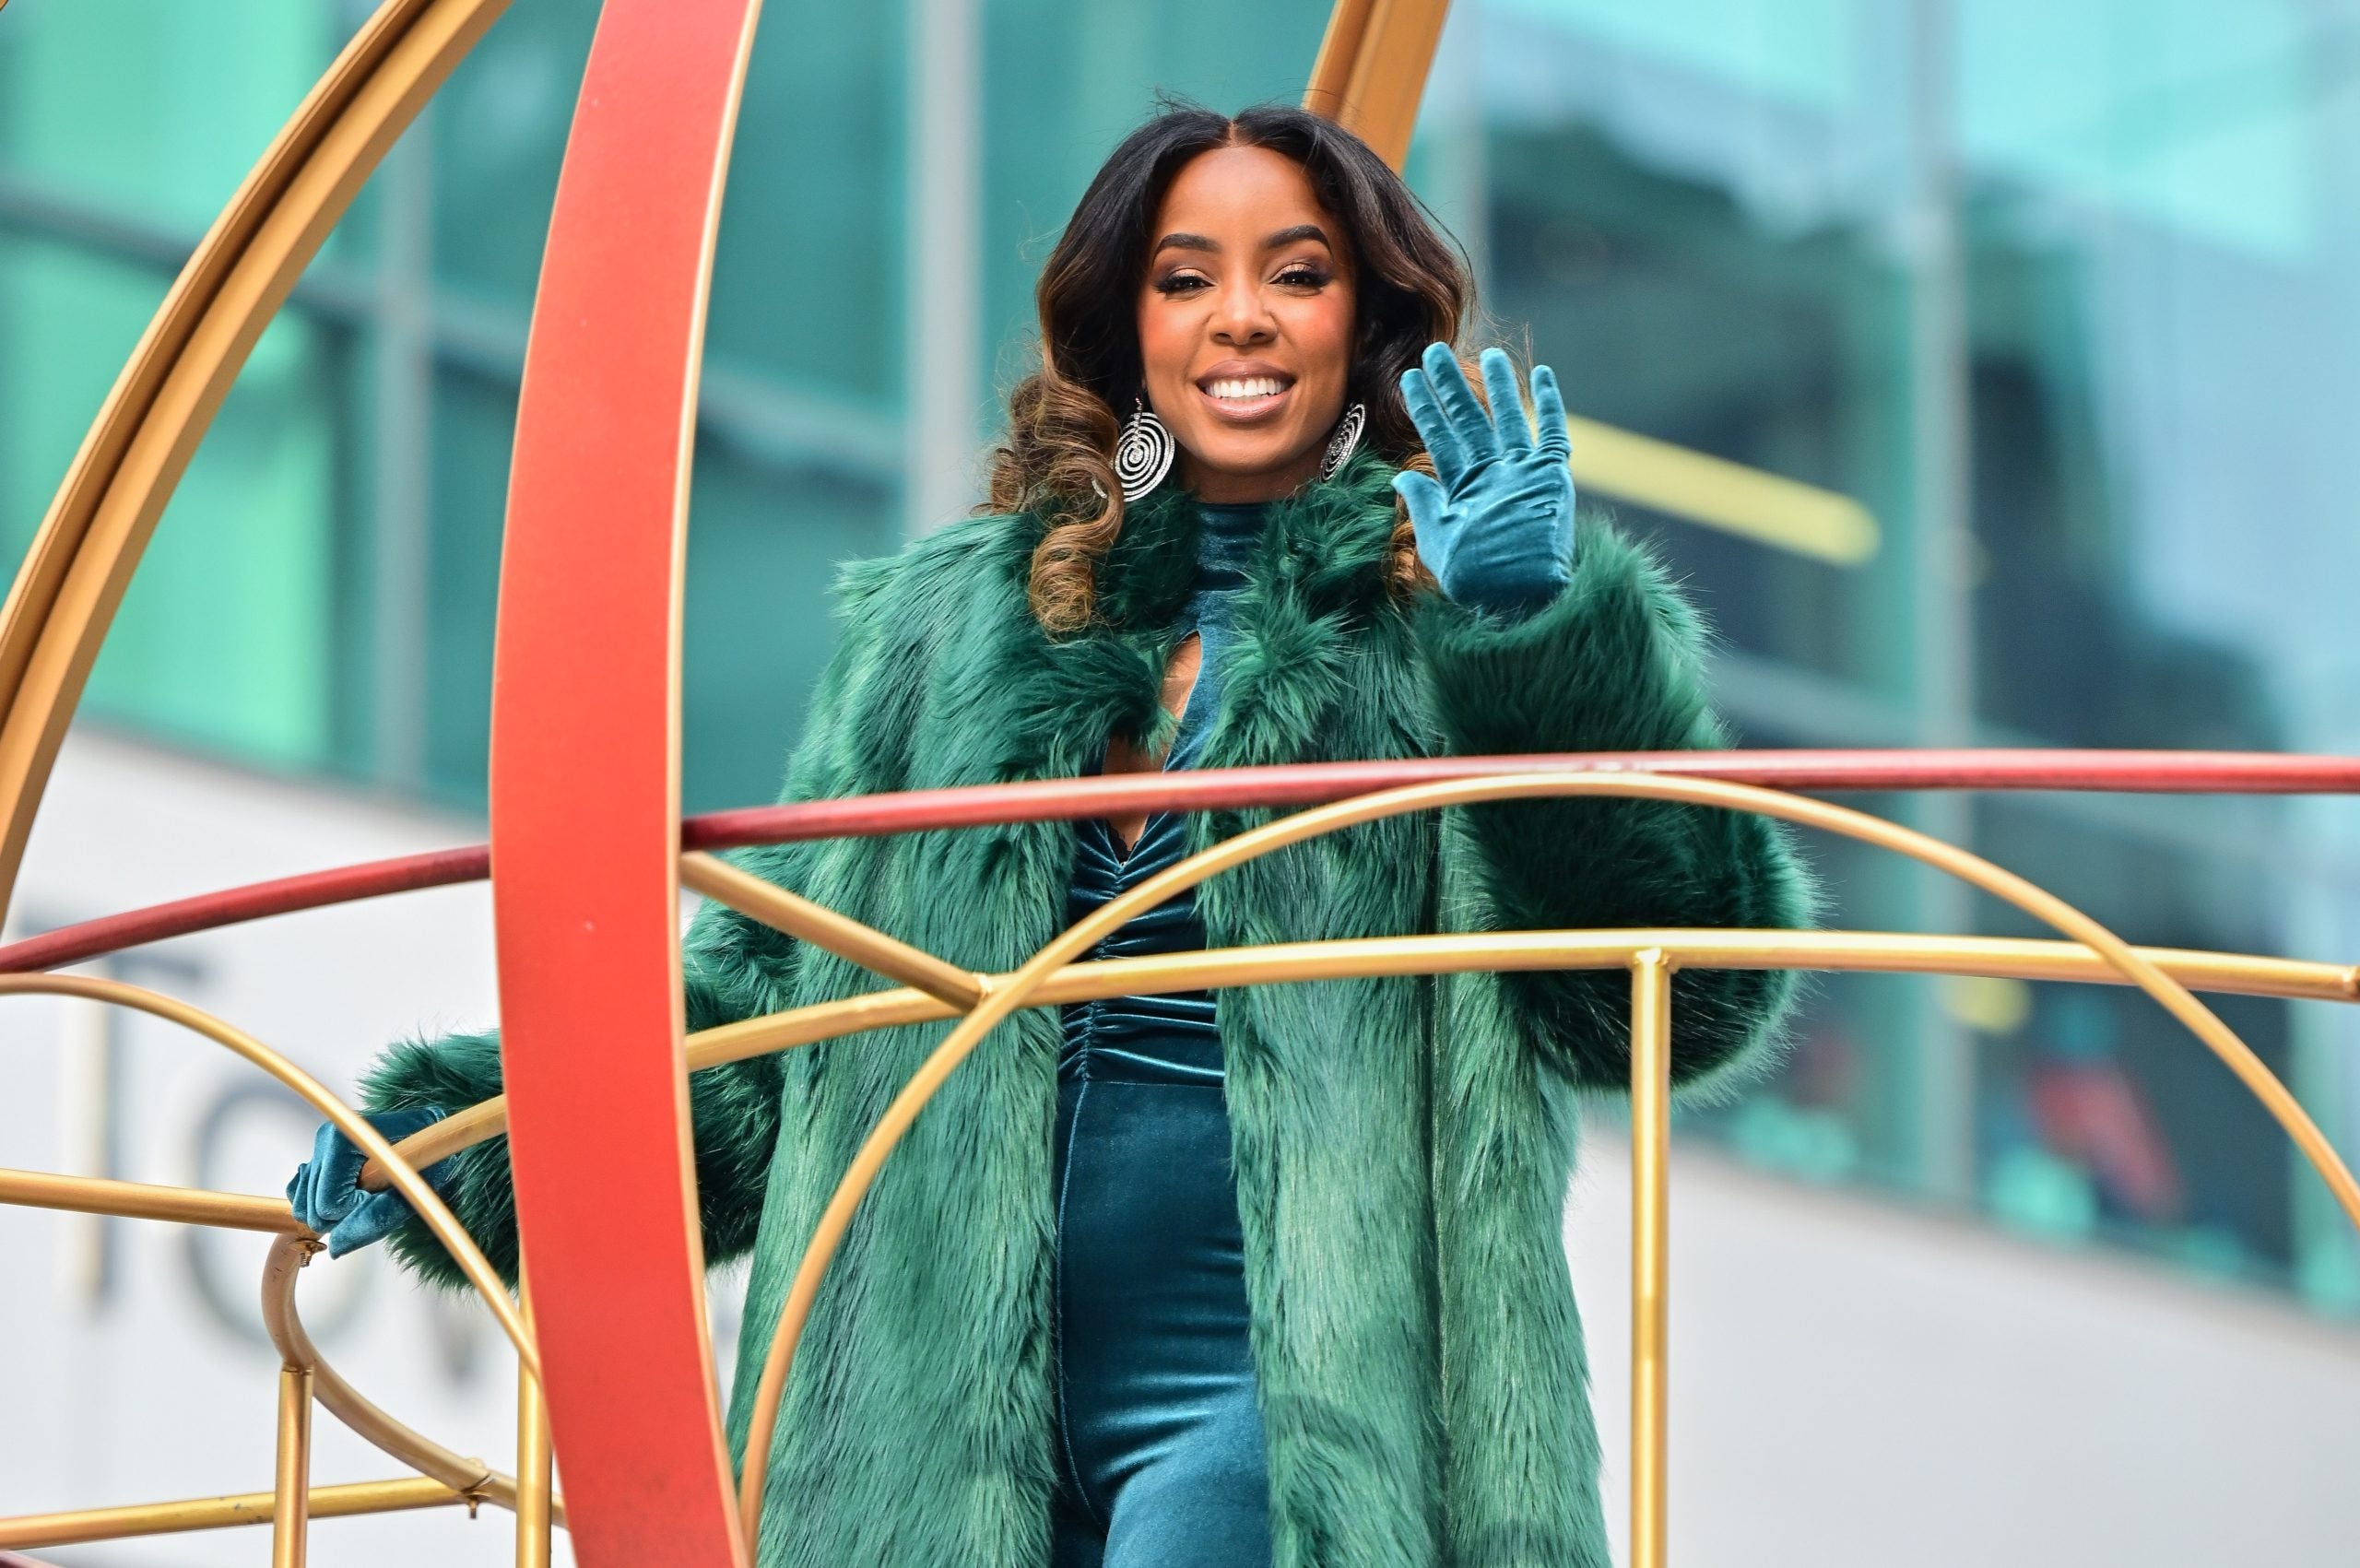 Birthday Slay! Kelly Rowland Is Finer Than Ever At 41